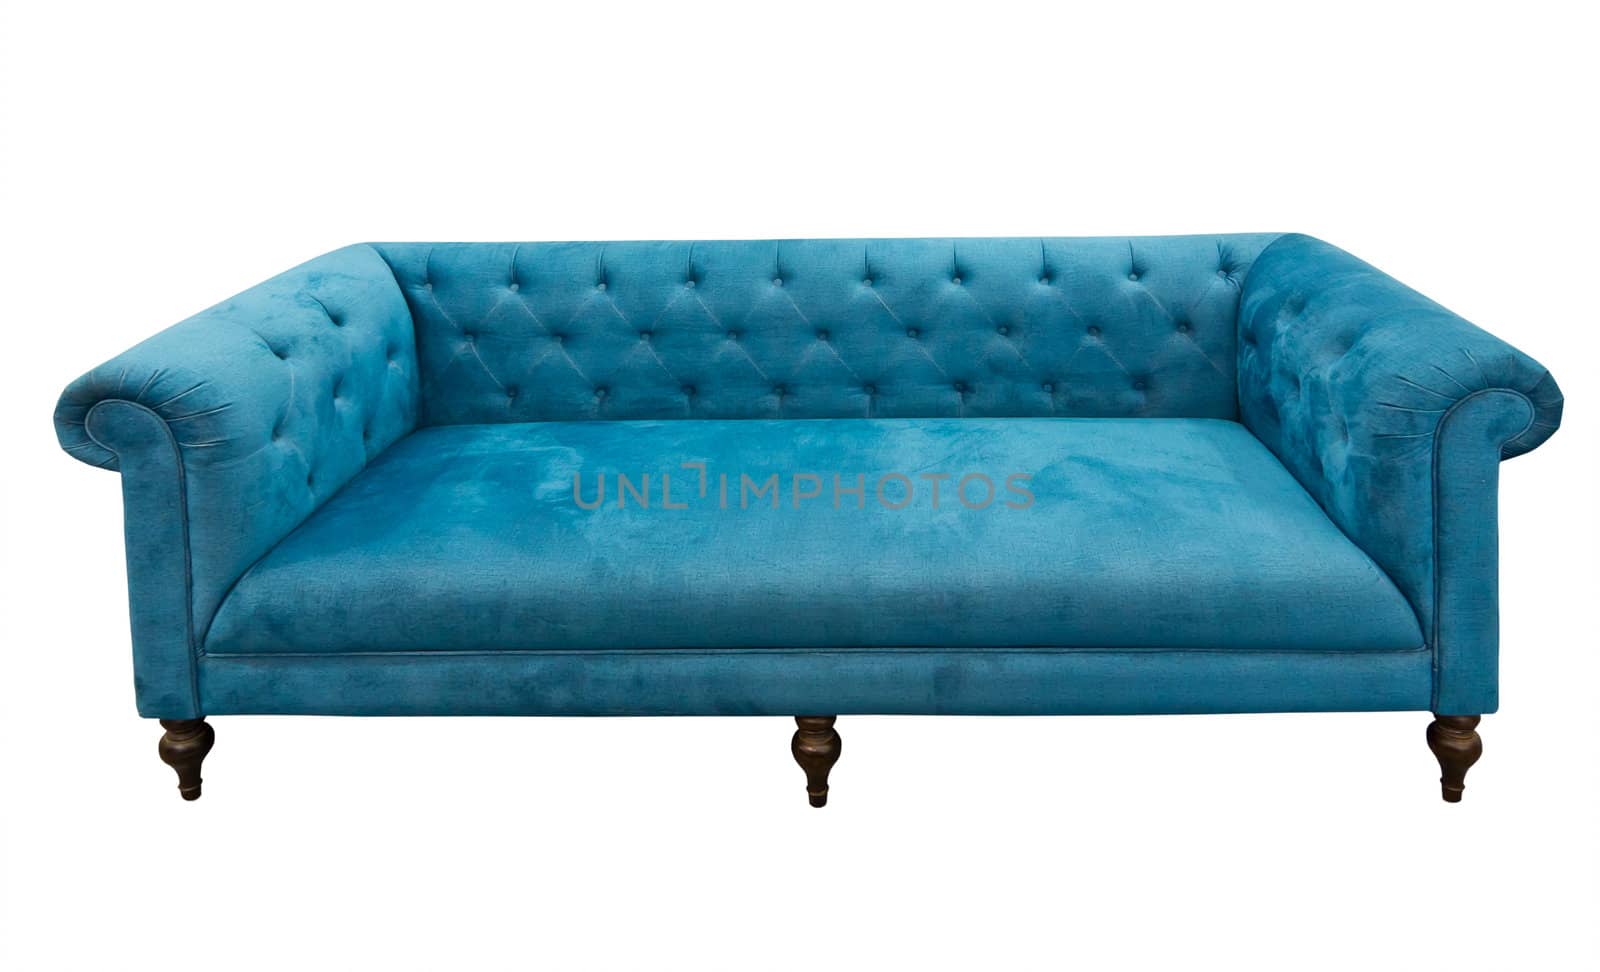 blue sofa isolated by tungphoto